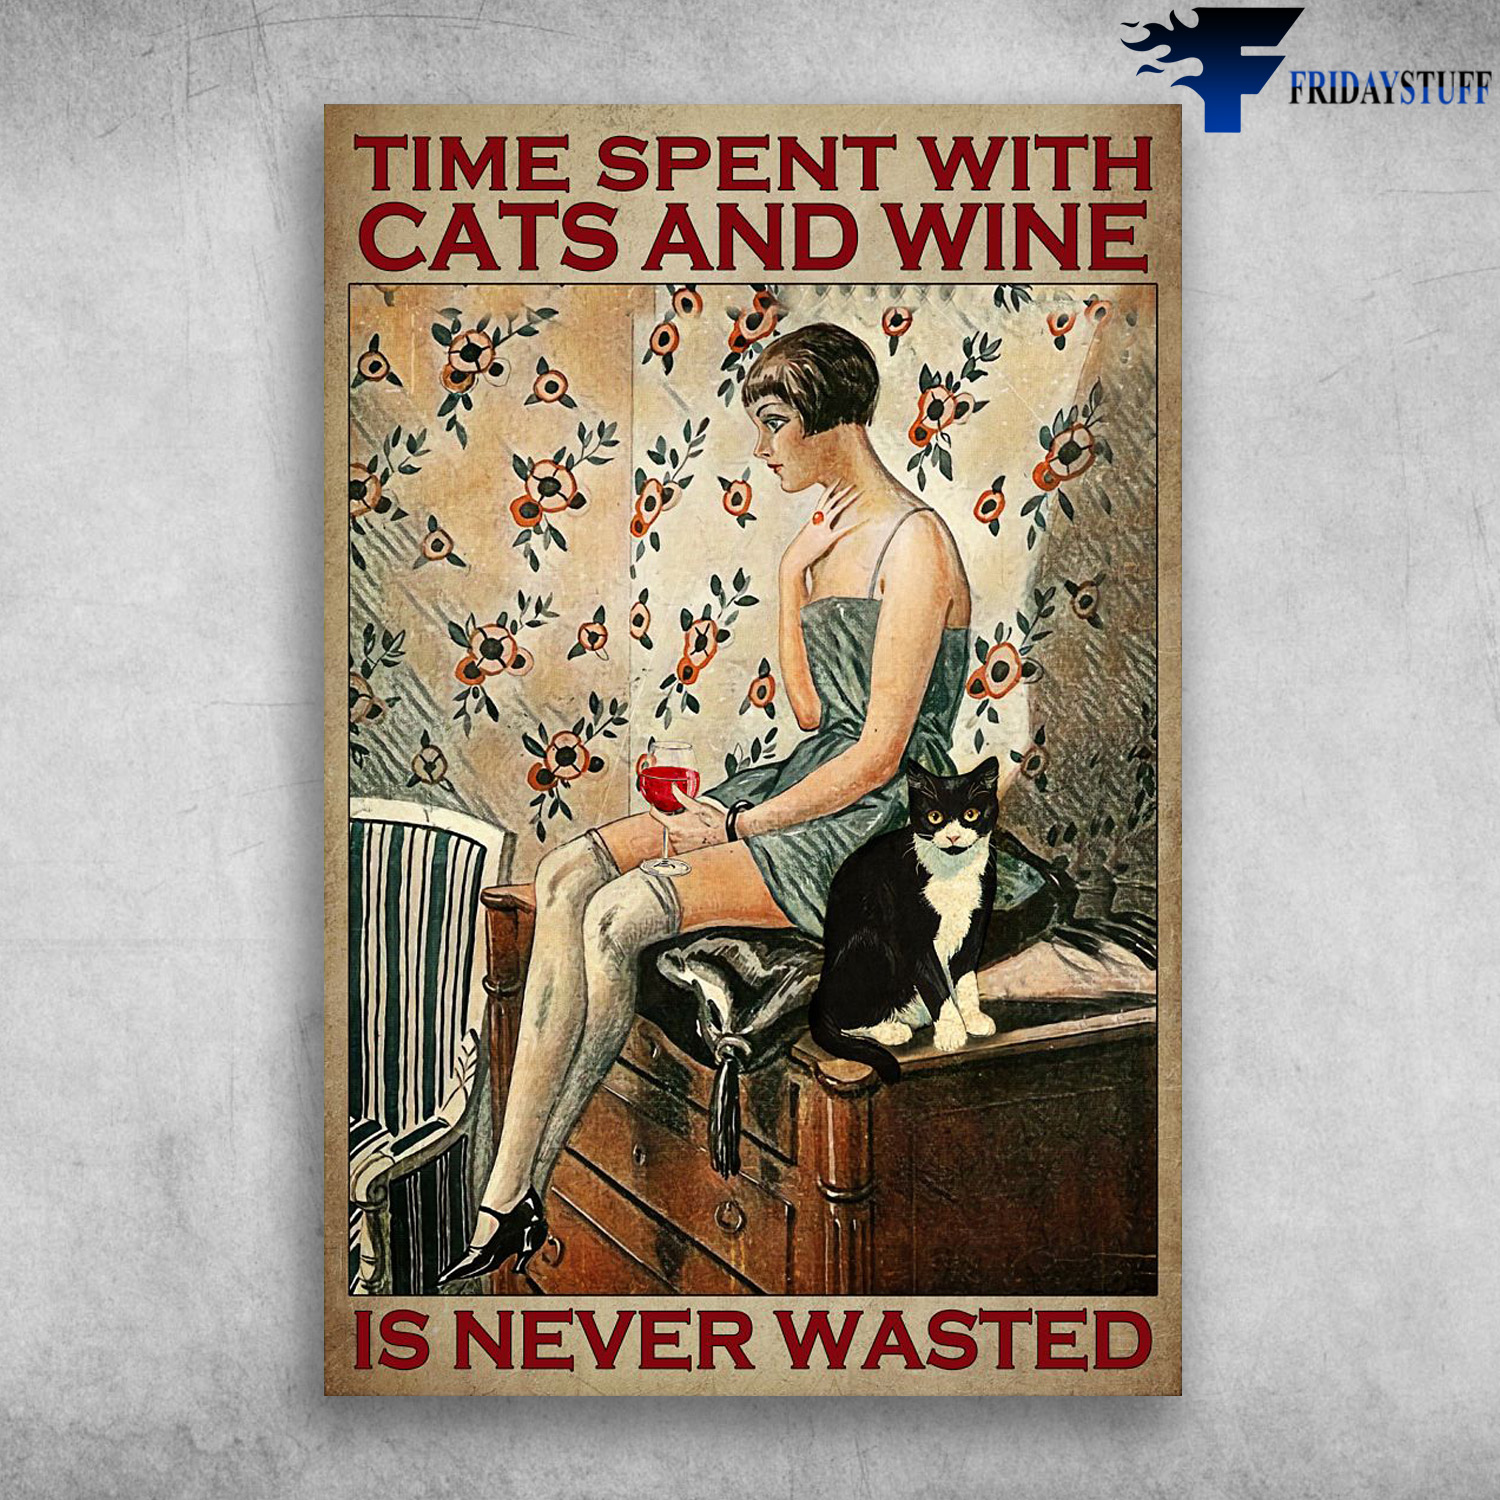 Girl With Black Cats And Wine - Time Spent With Cats And Wine Is Never Wasted